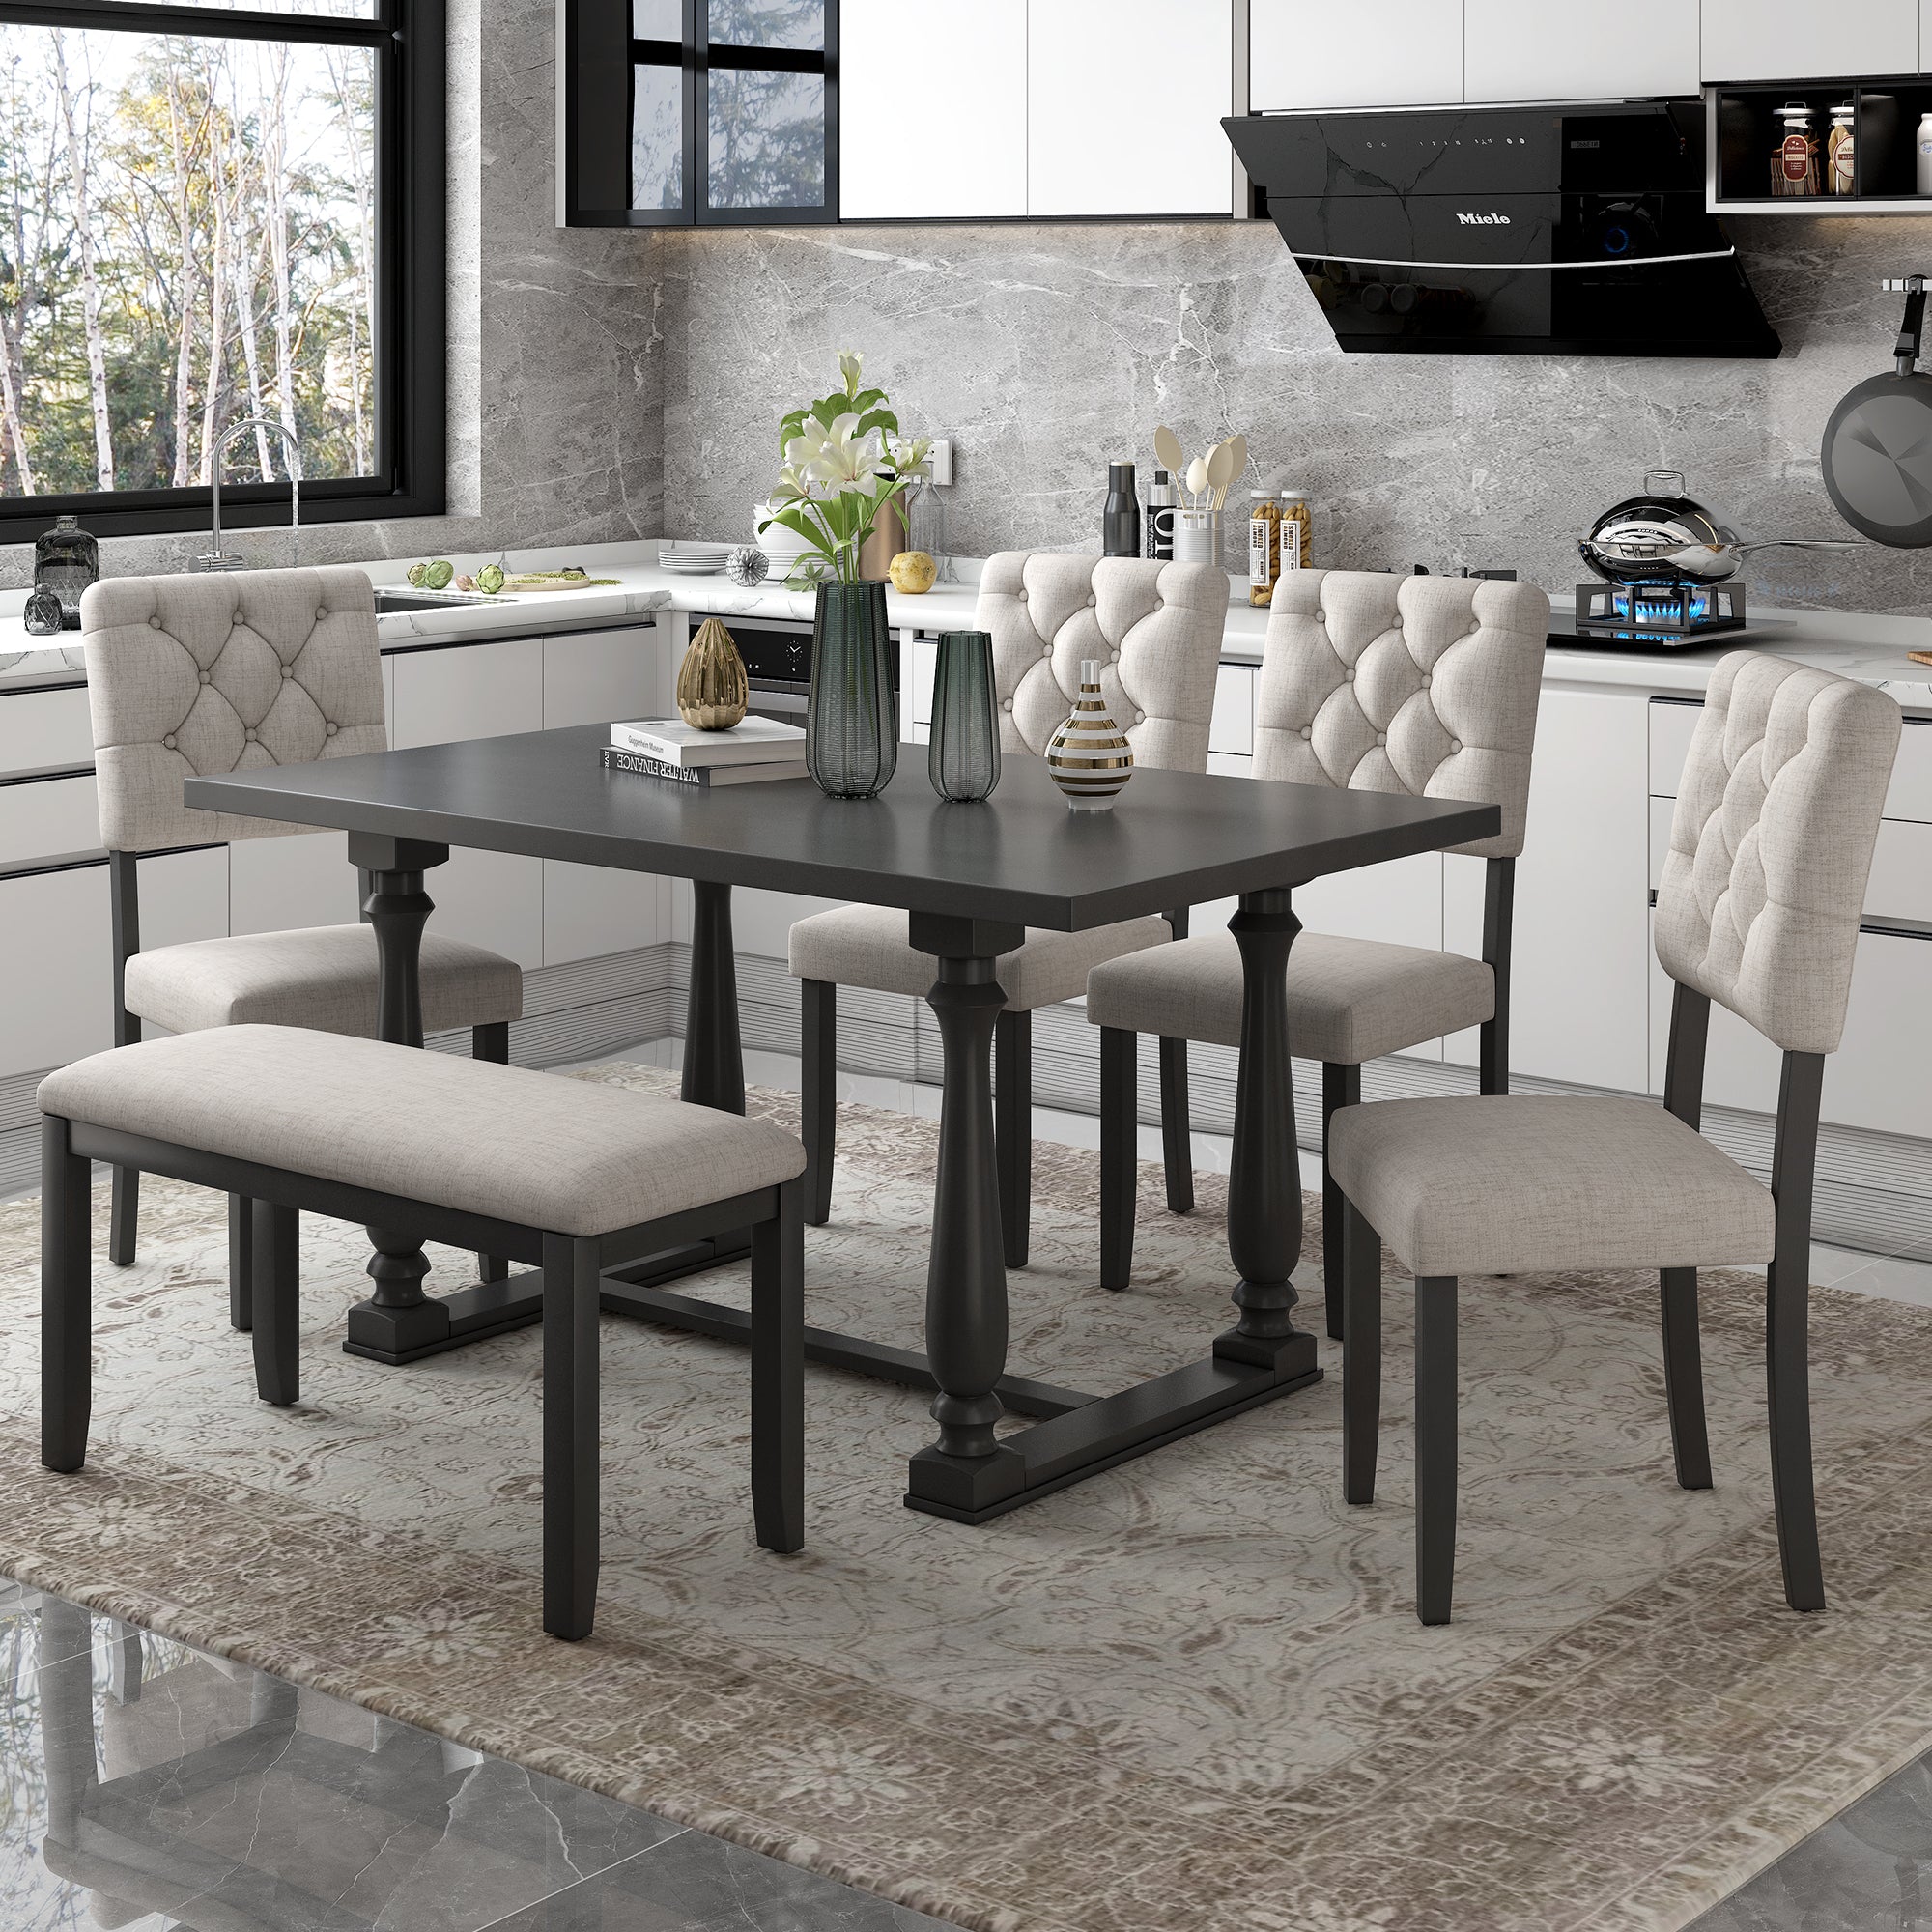 TREXM 6-Piece Dining Table and Chair Set with Special-shaped Legs and Foam-covered Seat Backs&Cushions for Dining Room (Gary)